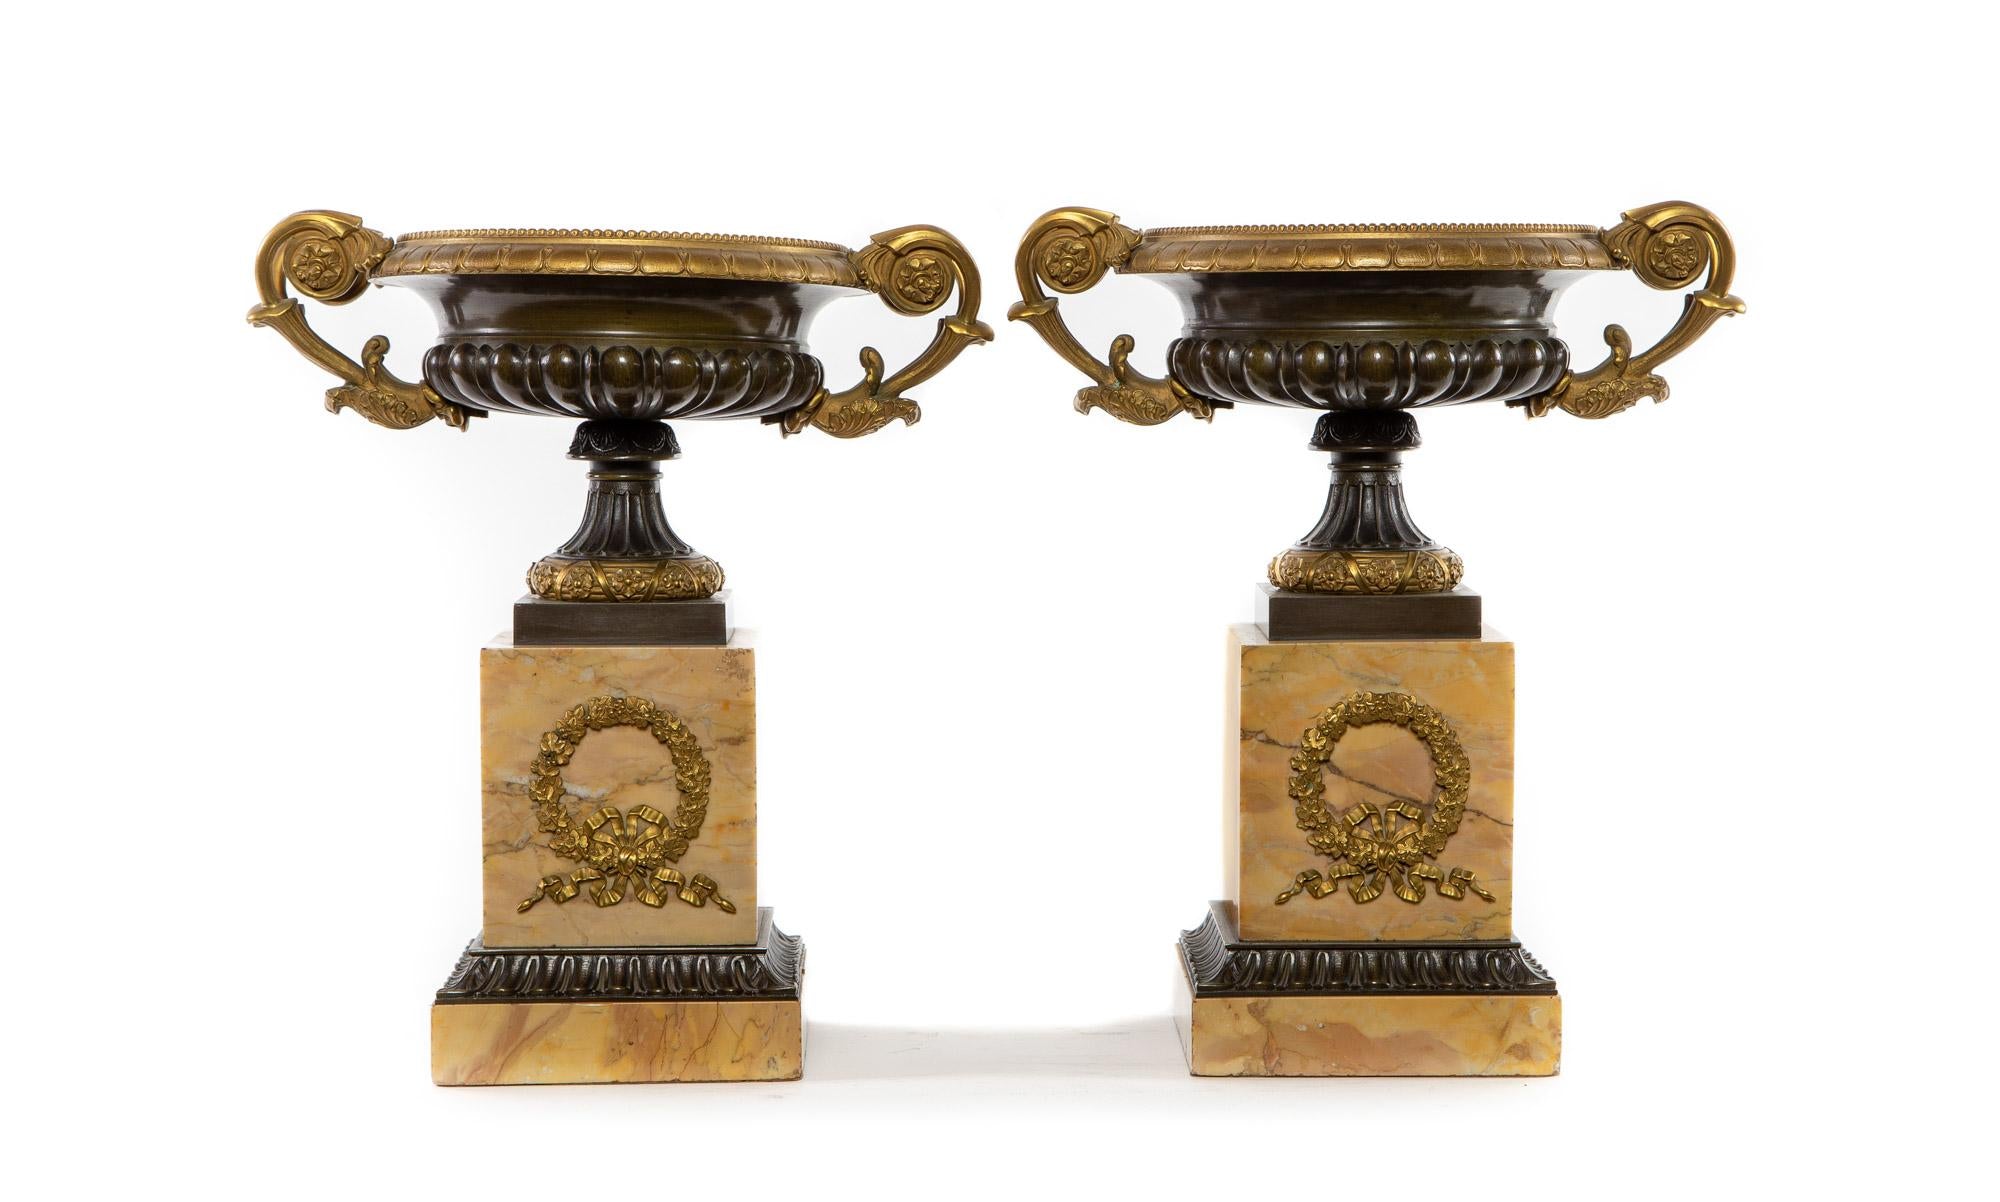 A Pair of Neoclassical Bronze and Gilt Bronze Urns on Sienna Marble Base